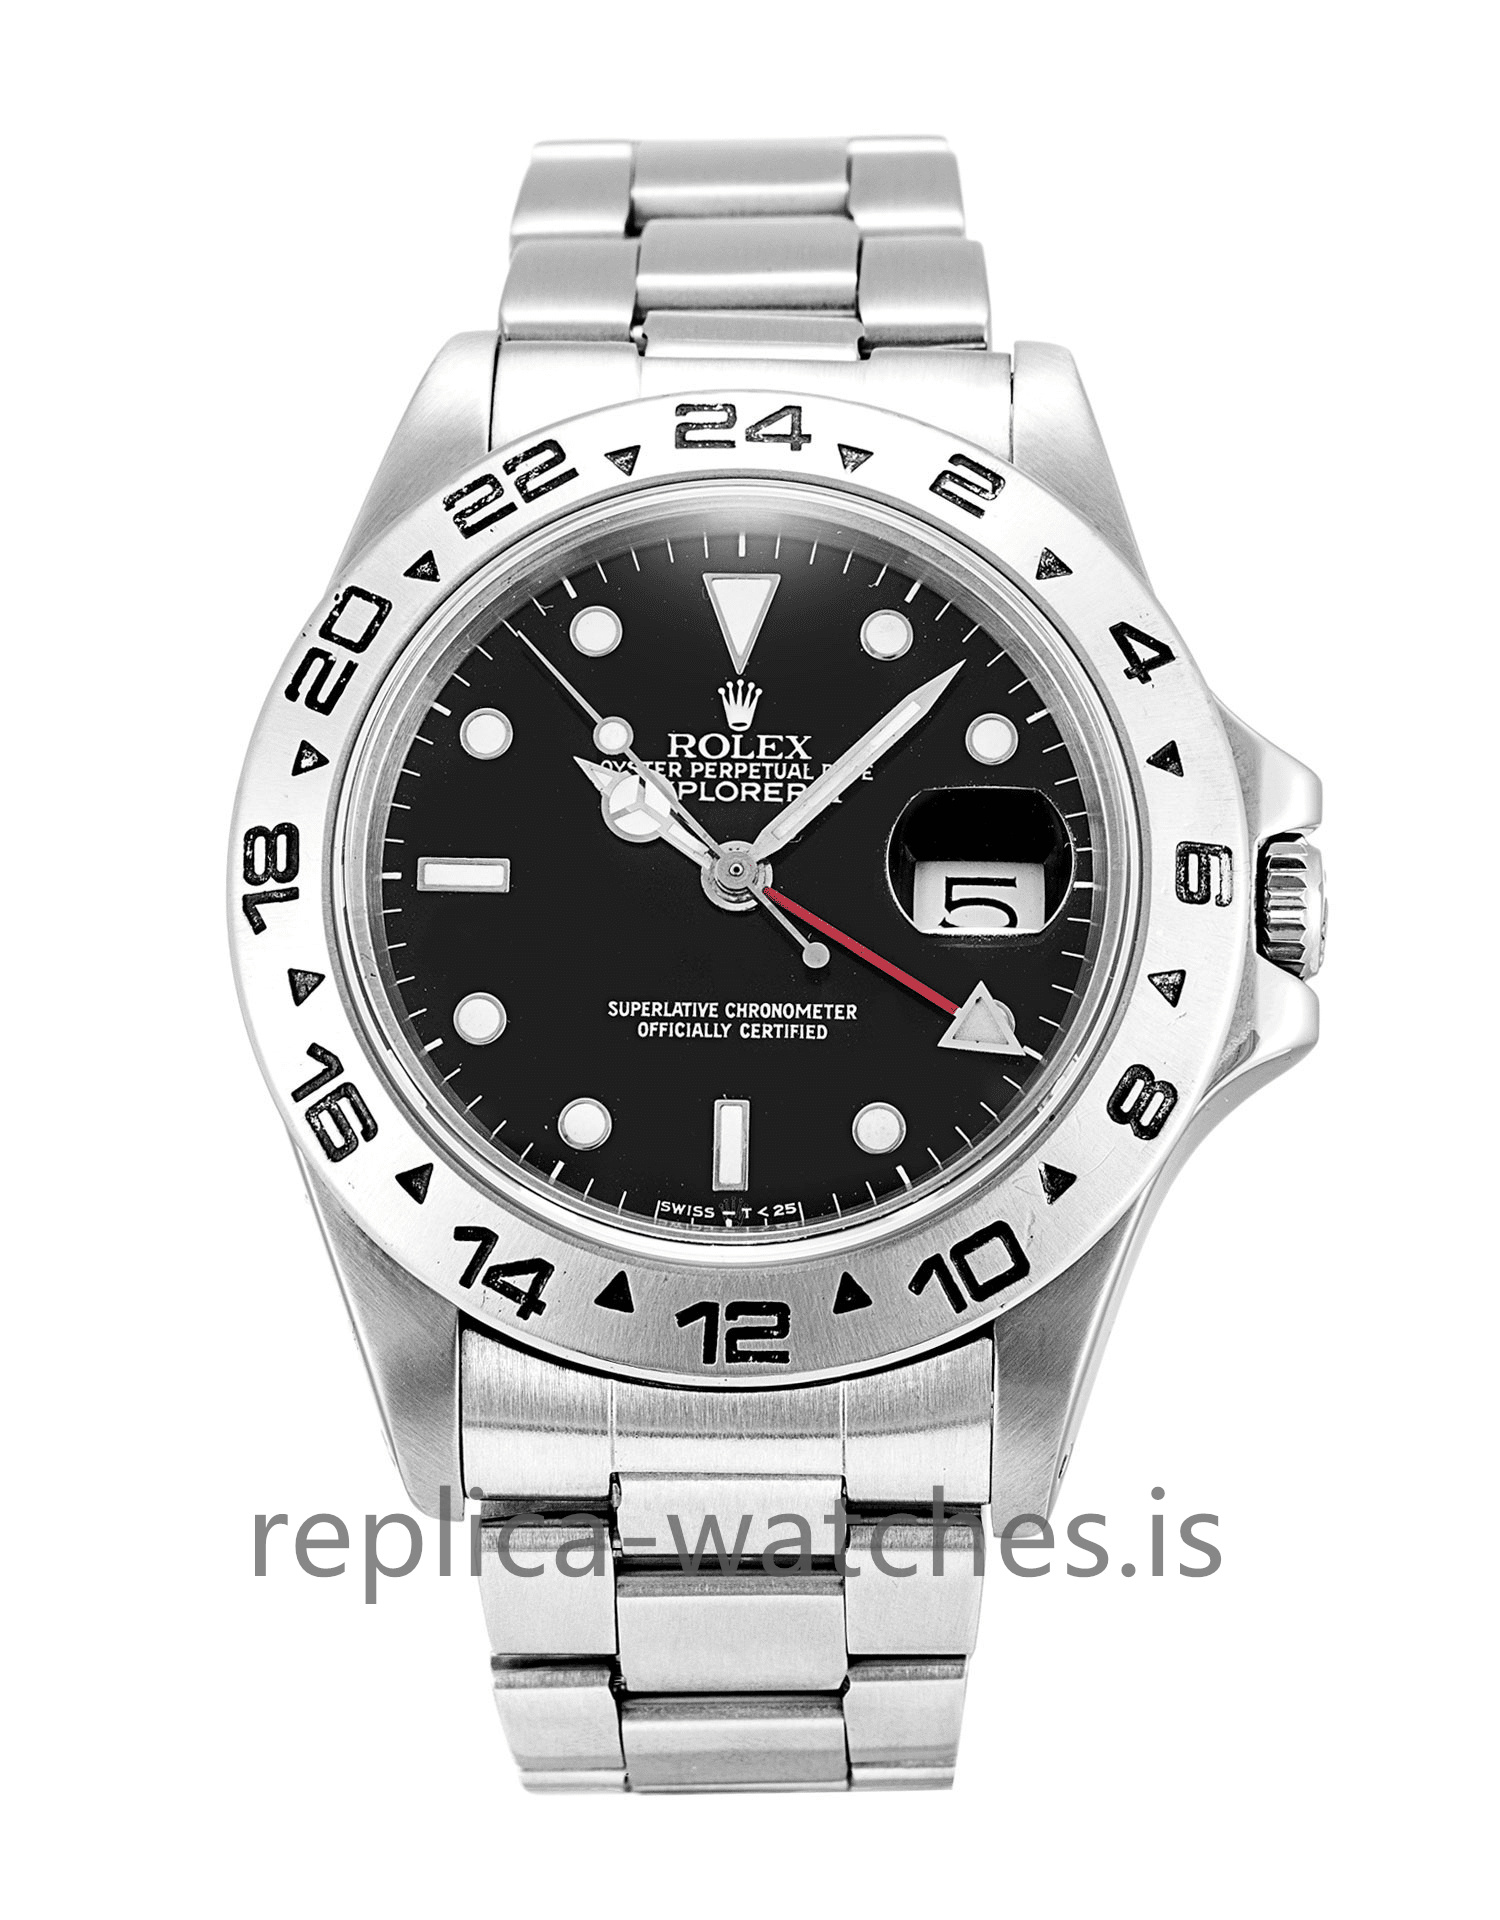 fake submariner for sale replica watches